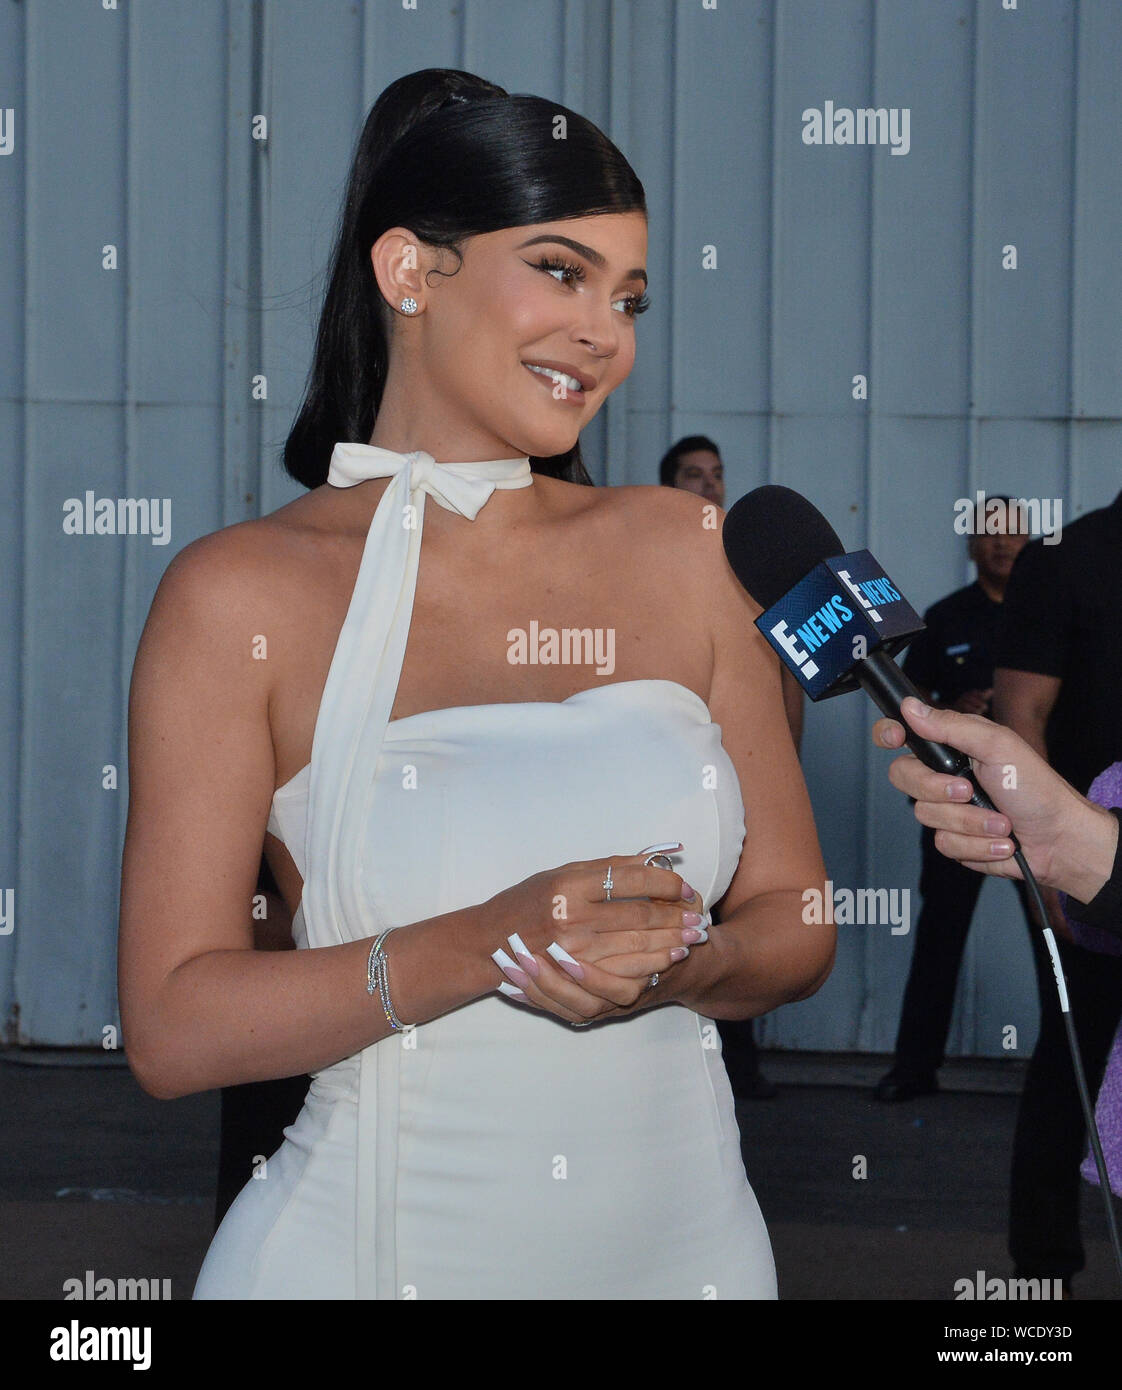 Kylie Jenner attends the premiere of Netflix's 'Travis Scott: Look Mom I Can Fly' at Barker Hangar on August 27, 2019 in Santa Monica, California. 'Travis Scott: Look Mom I Can Fly' traces the Houston rapper's rise to super-stardom, focusing on the months surrounding Scott's third album 'Astroworld'.  Photo by Jim Ruymen/UPI Stock Photo